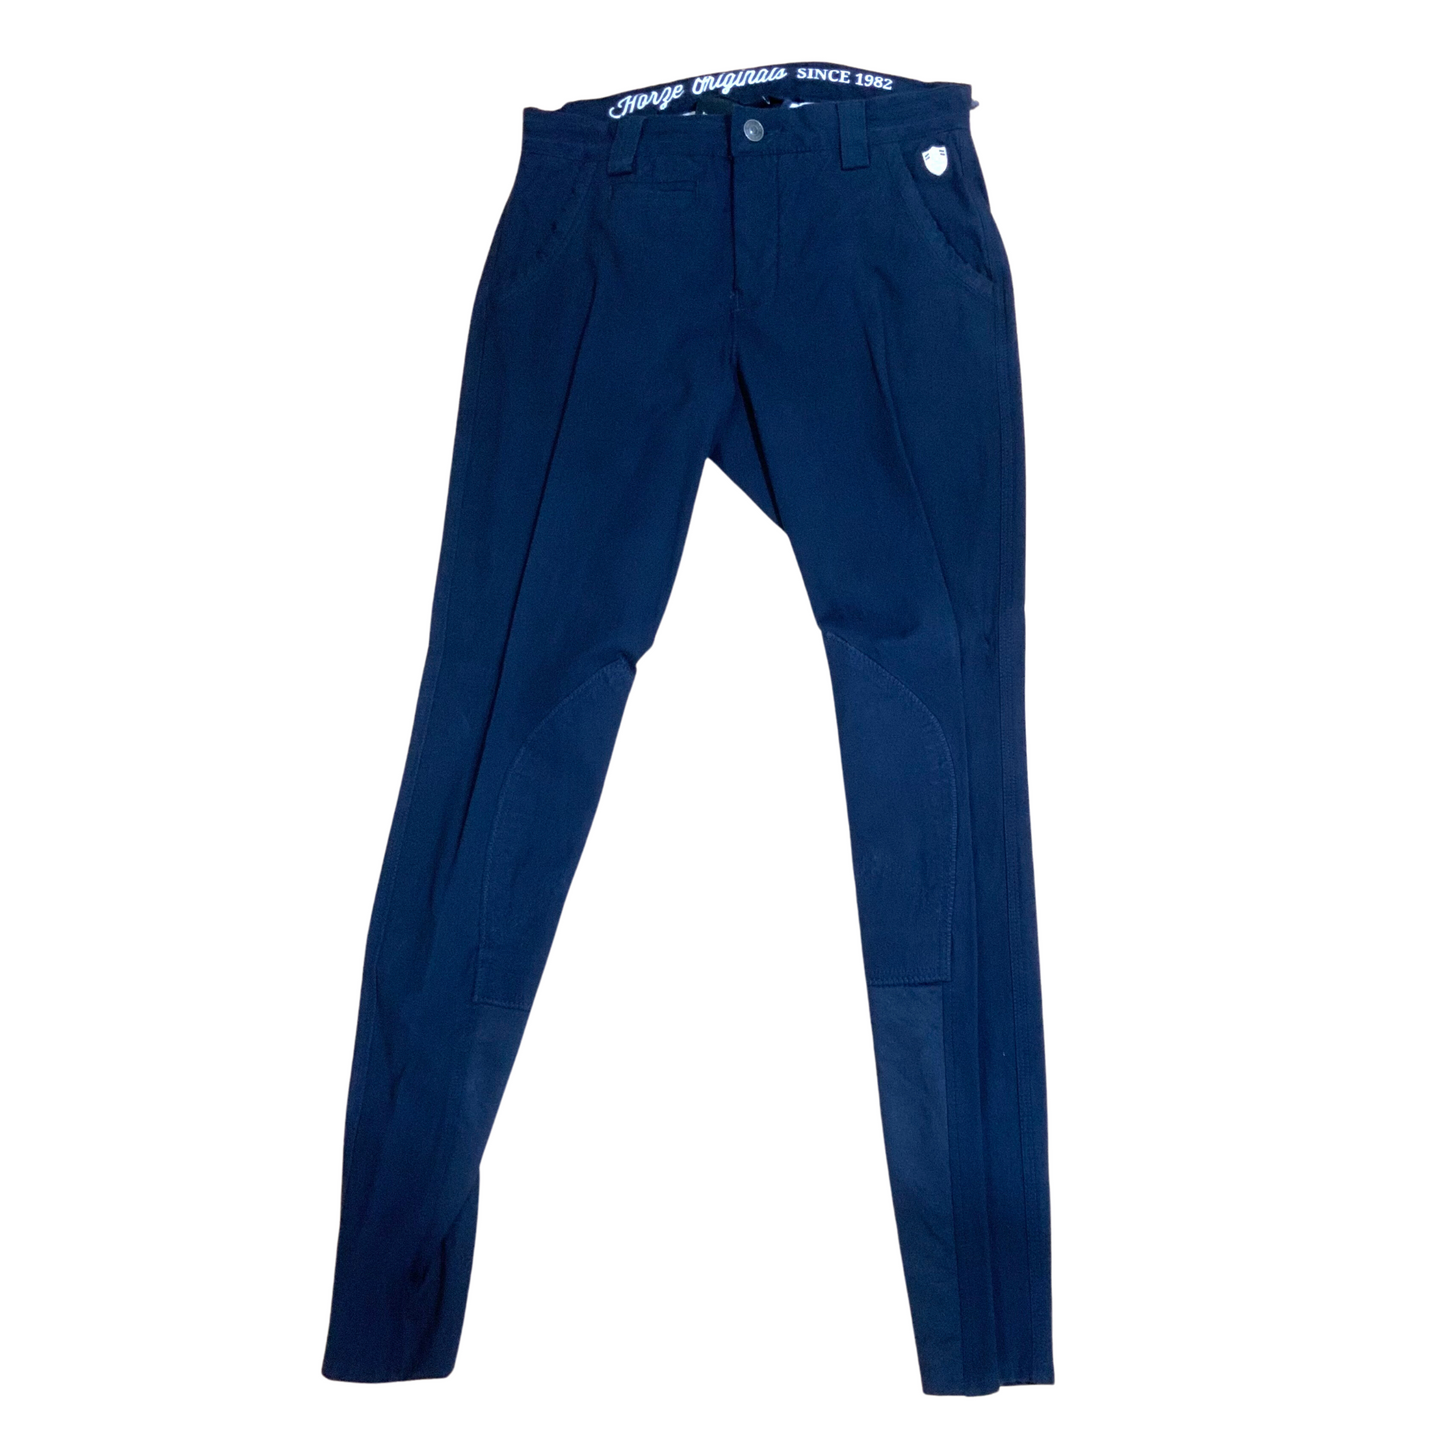 Laura's Loft || Carlos Men's Knee Patch Breeches || Navy Size 30 ONLY